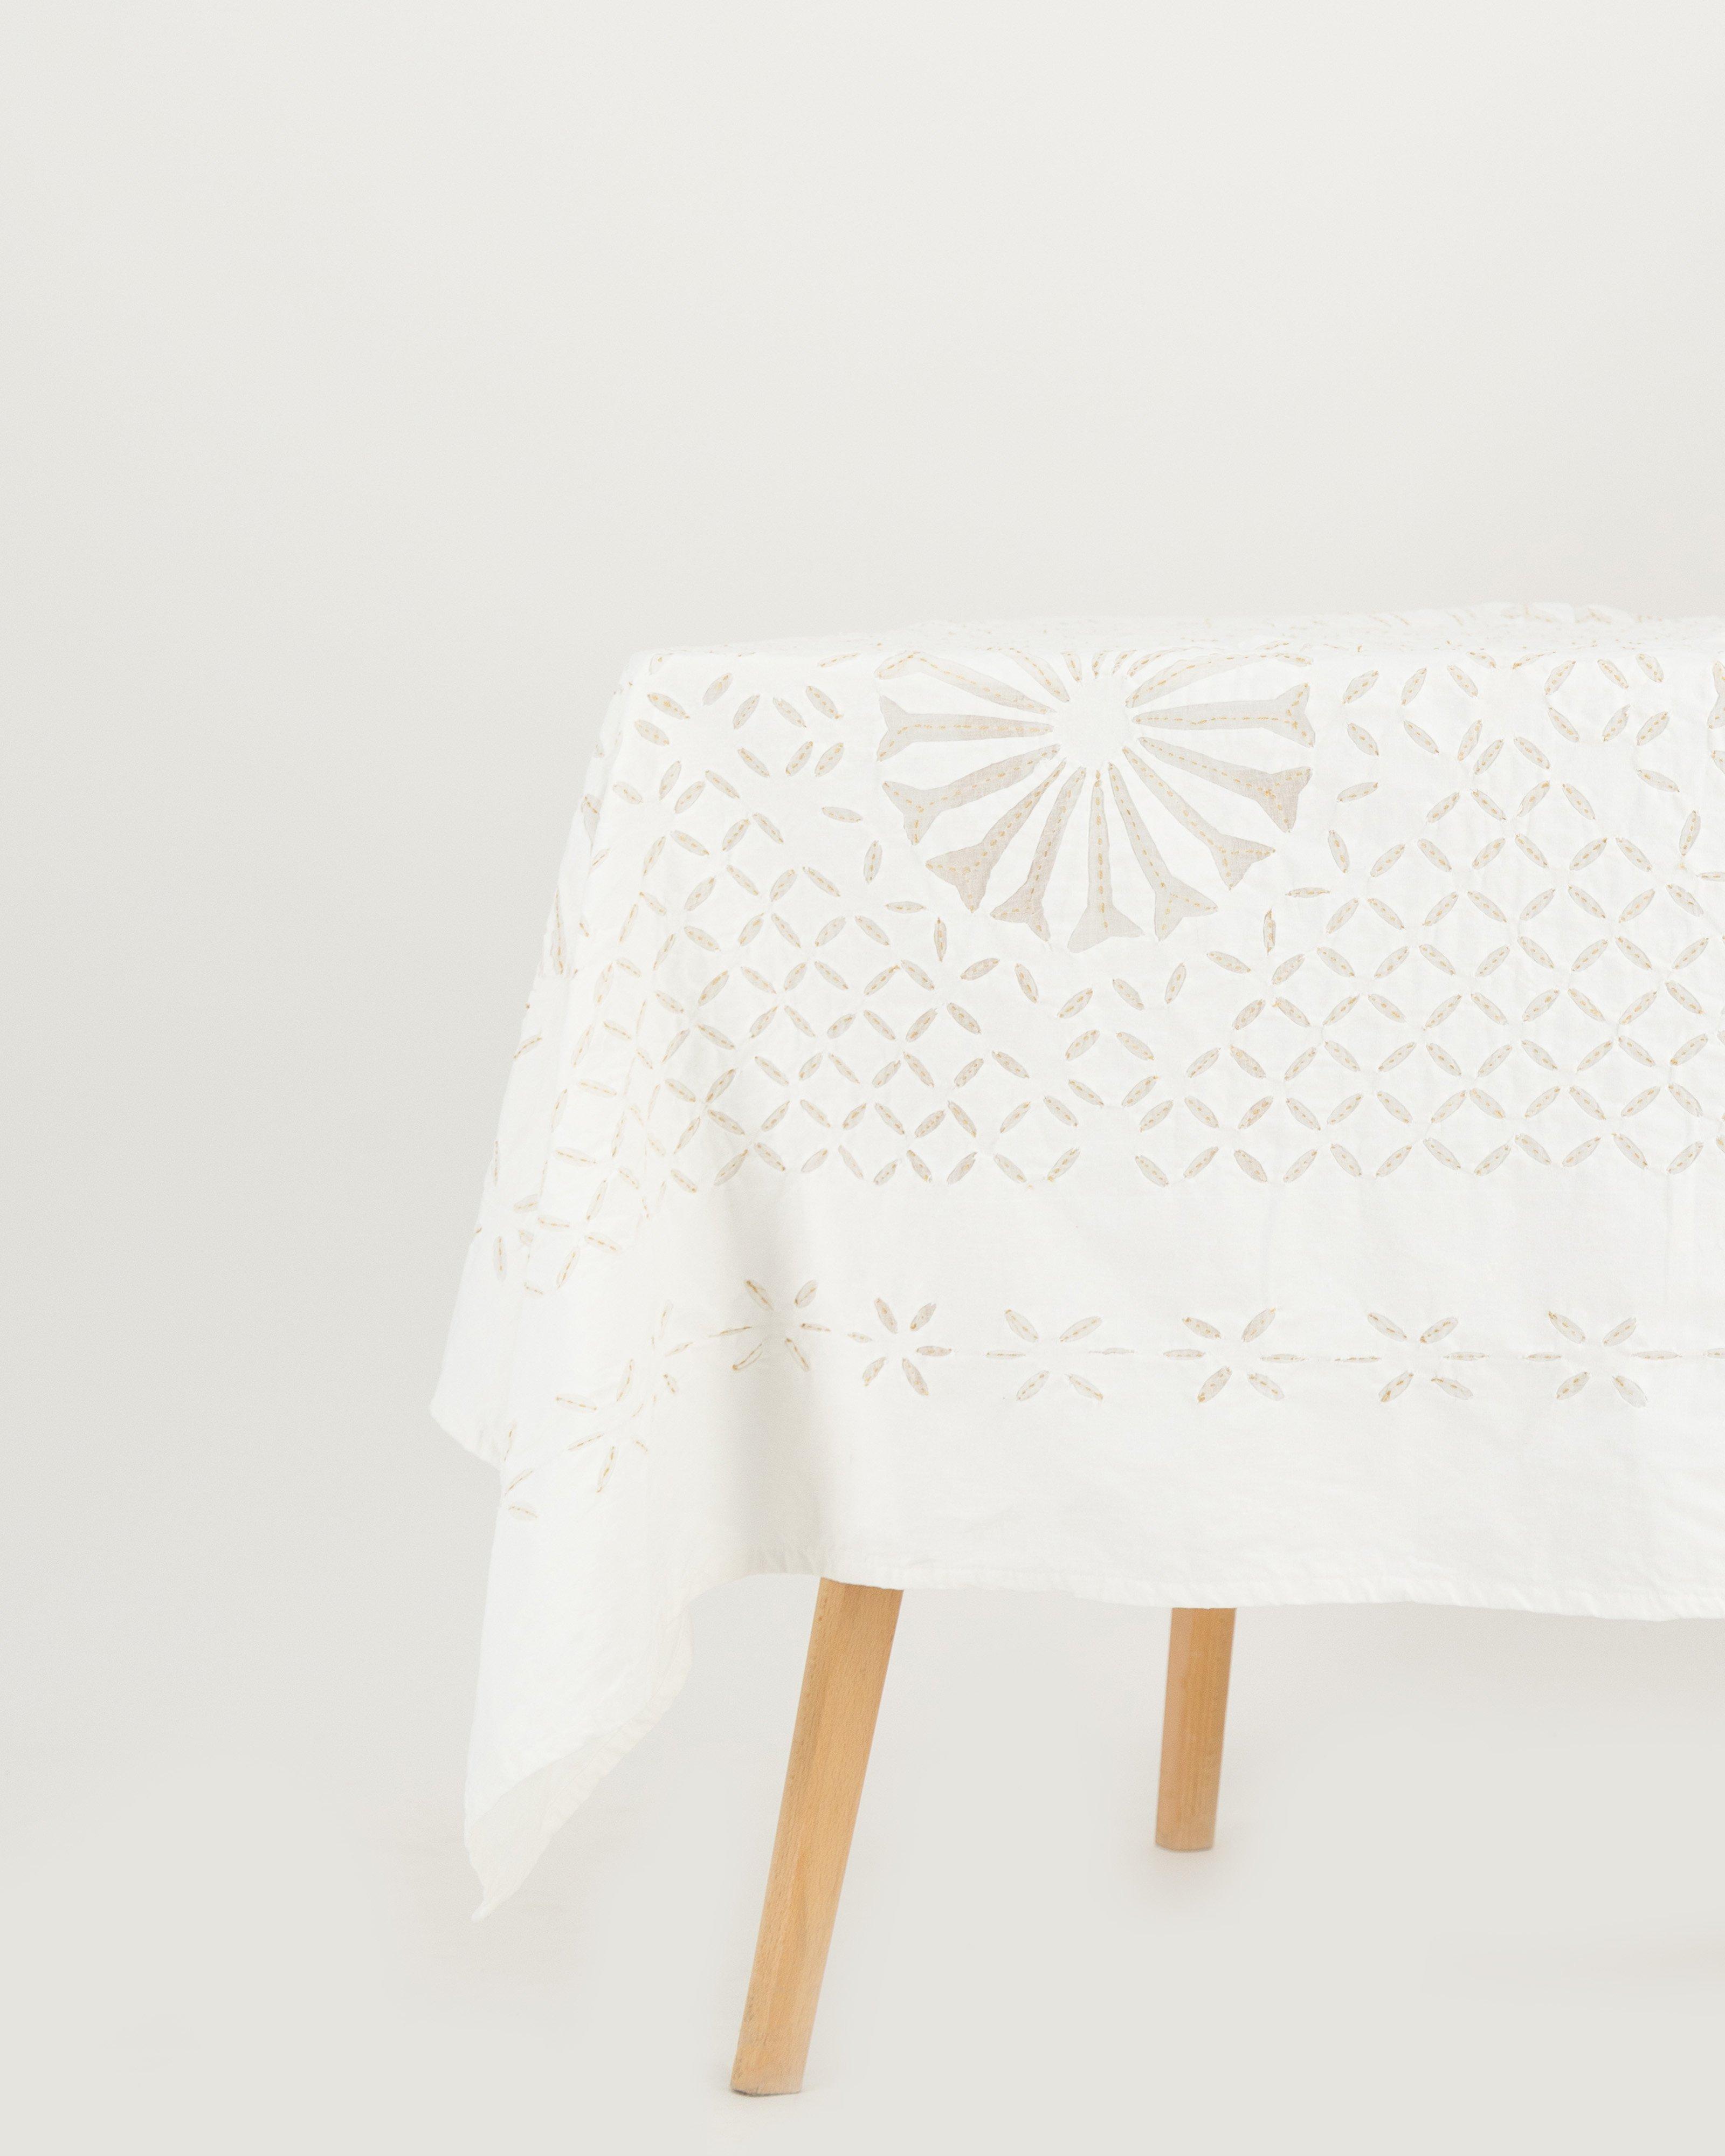 Artisanal Applique and Hand Stitched Tablecloth -  Milk